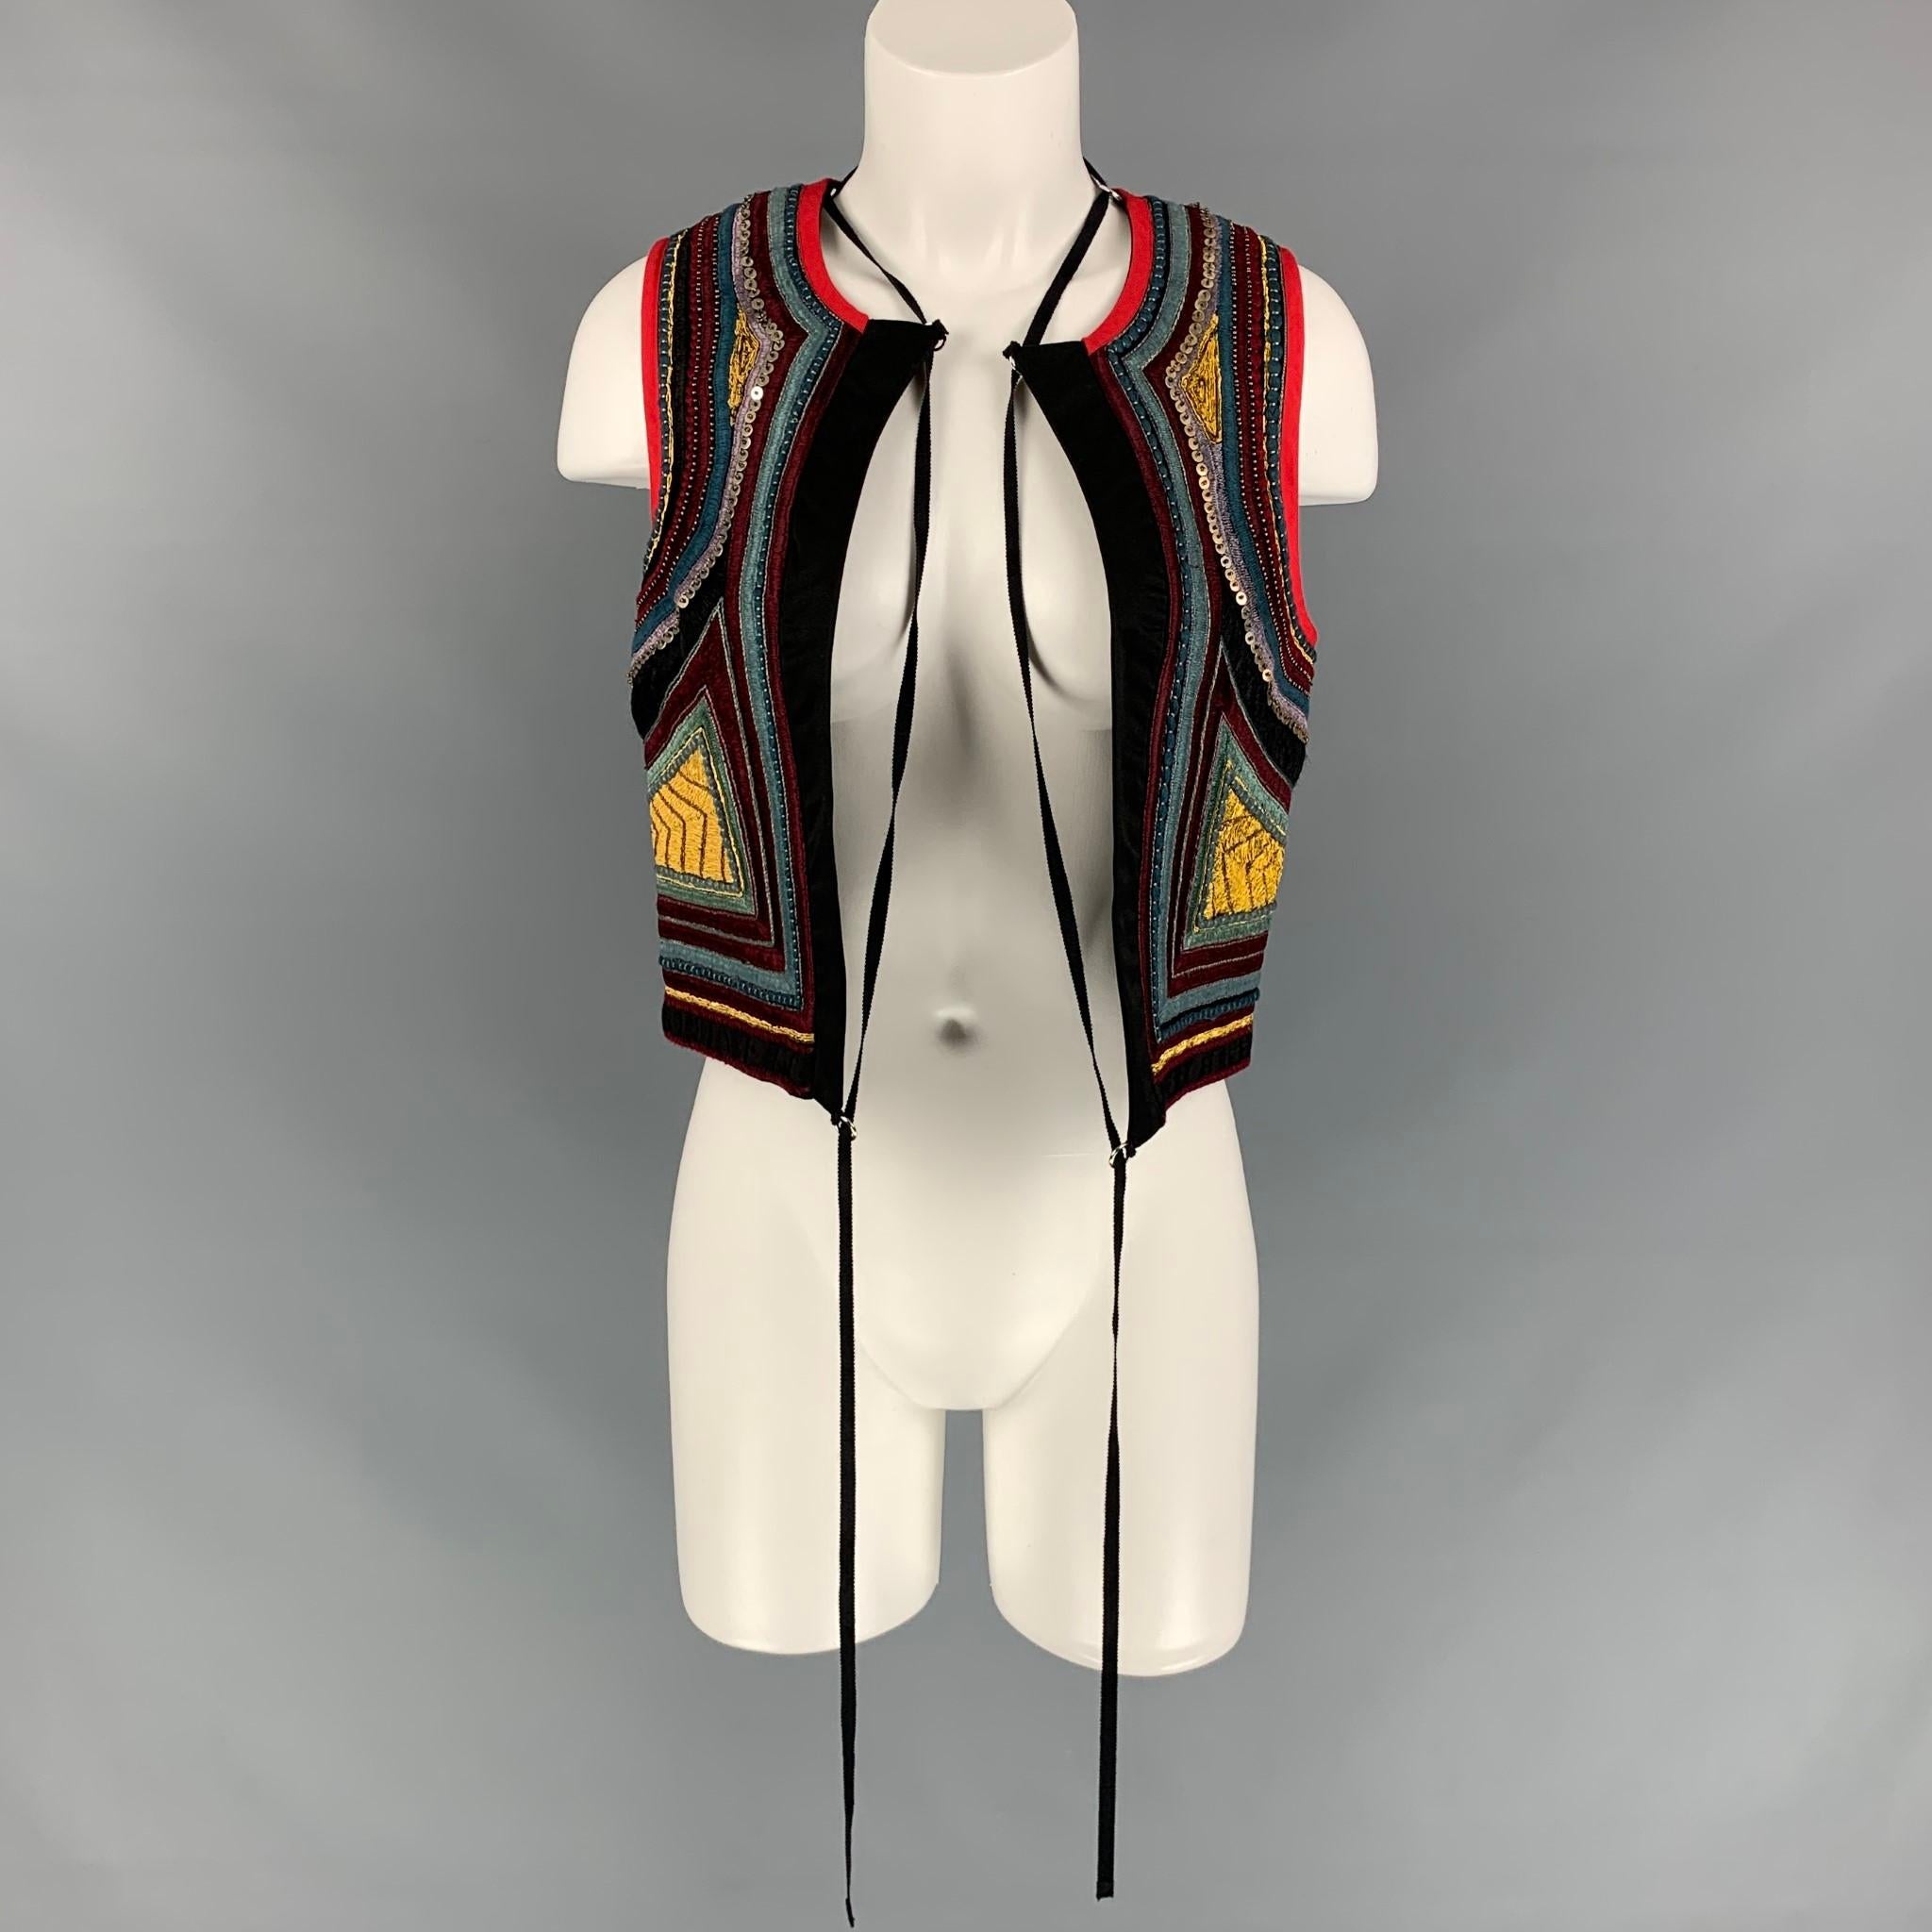 DRIES VAN NOTEN vest comes in a multi-color cotton with embroidered details throughout featuring a cropped style, loop details, beaded, and a open front. Handmade

New With Tags.
Marked: M
Original Retail Price: $1,740.00

Measurements:

Shoulder: